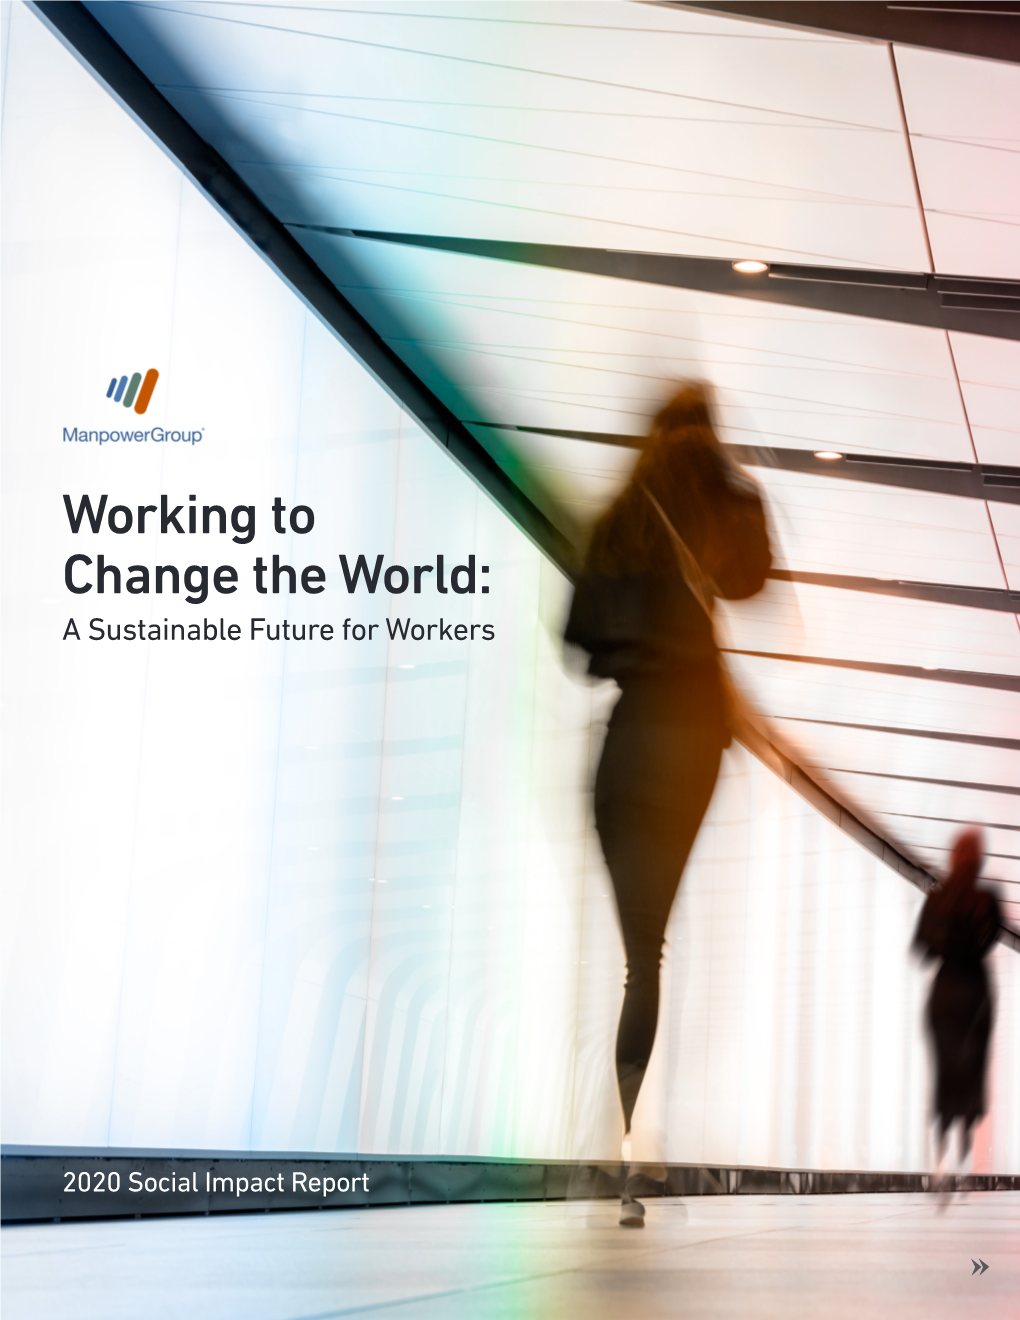 Working to Change the World: a Sustainable Future for Workers